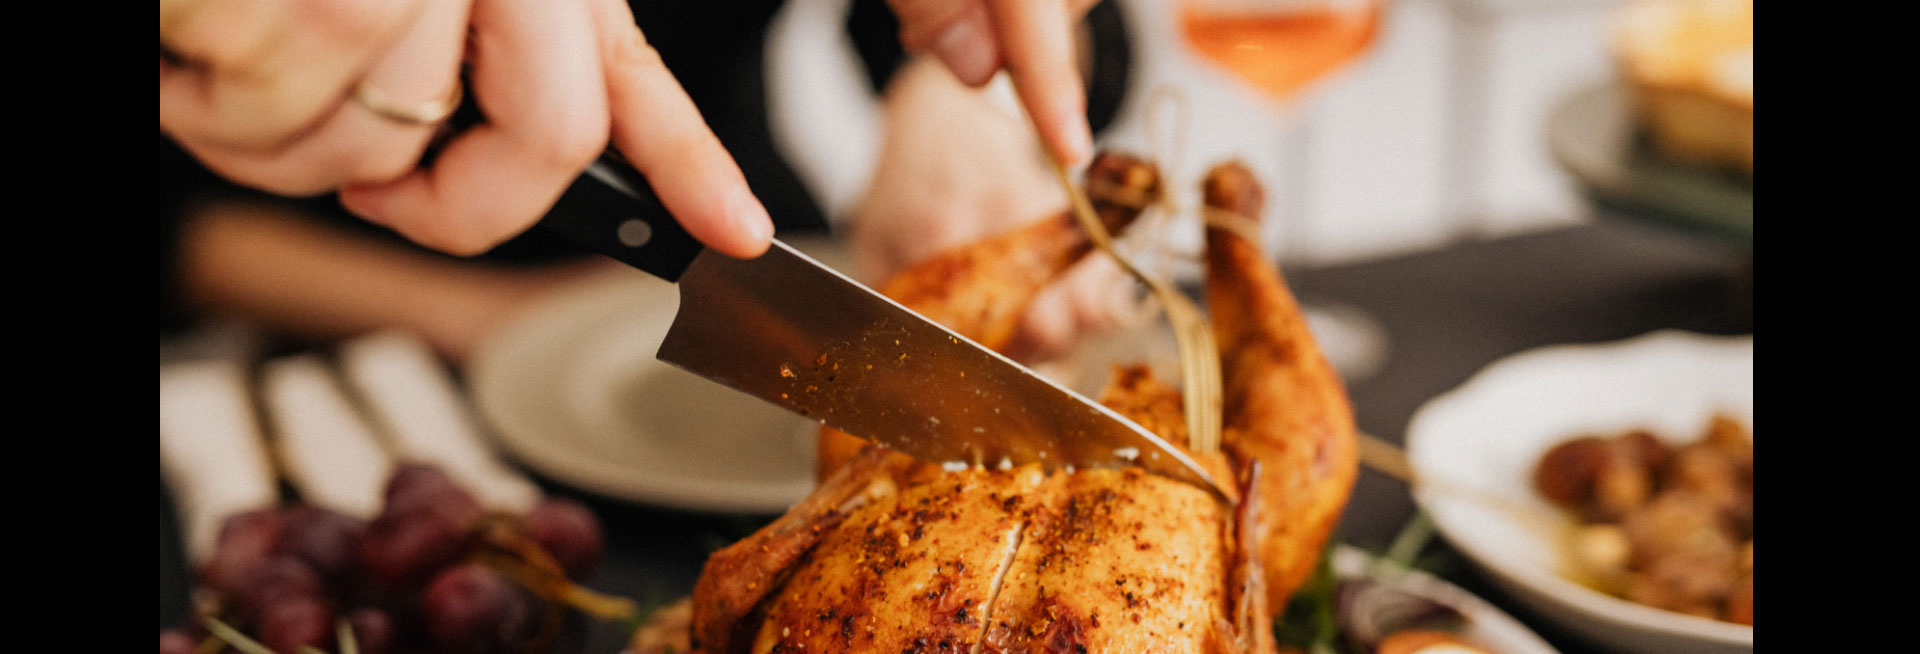 An image of a chicken being carved for a celebratory meal